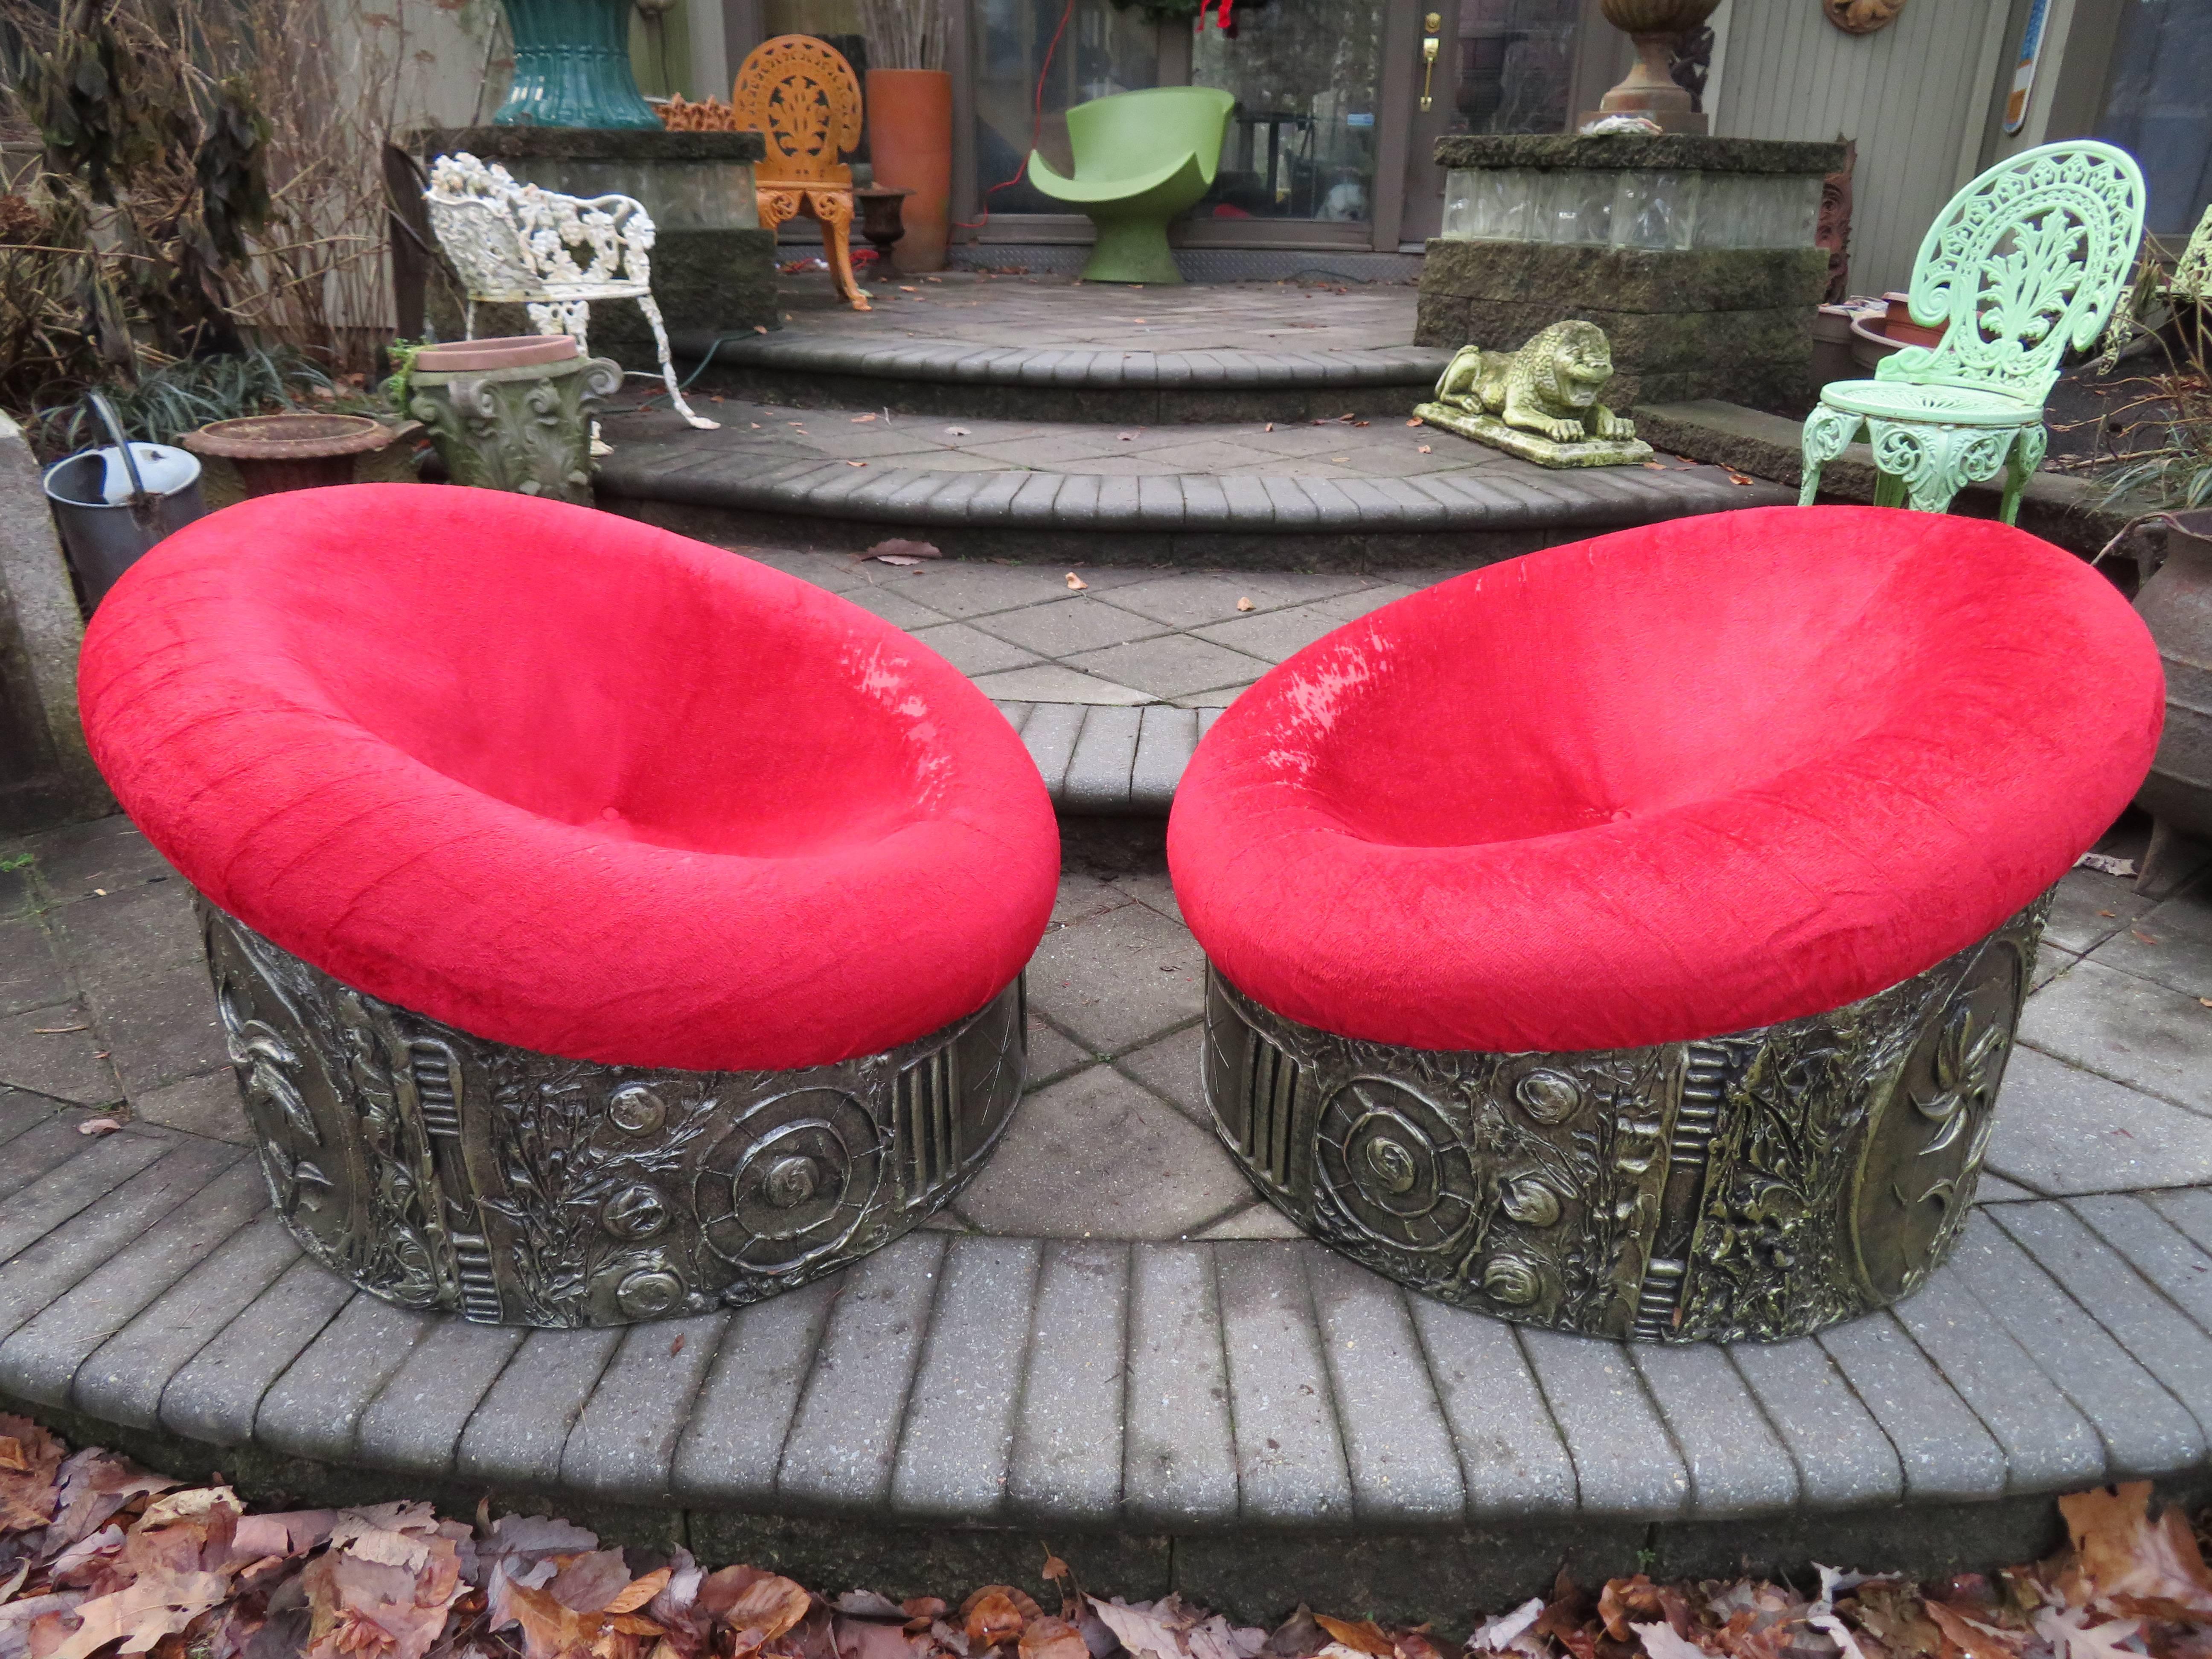 Amazing pair of Adrian Pearsall Brutalist lounge chairs. Chairs need new upholstery but bases are in excellent condition, circa 1970s.